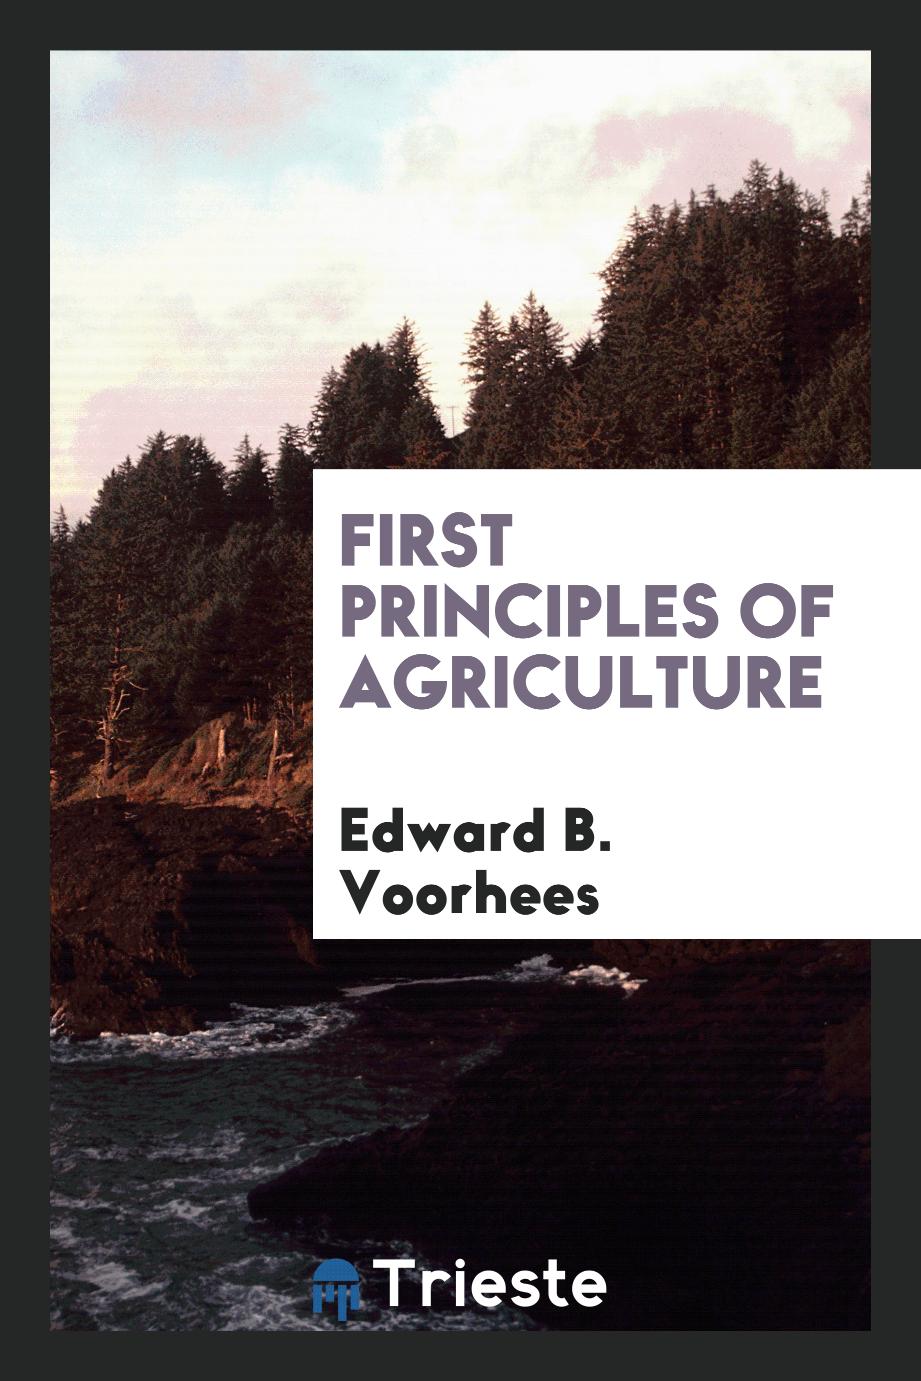 First principles of agriculture